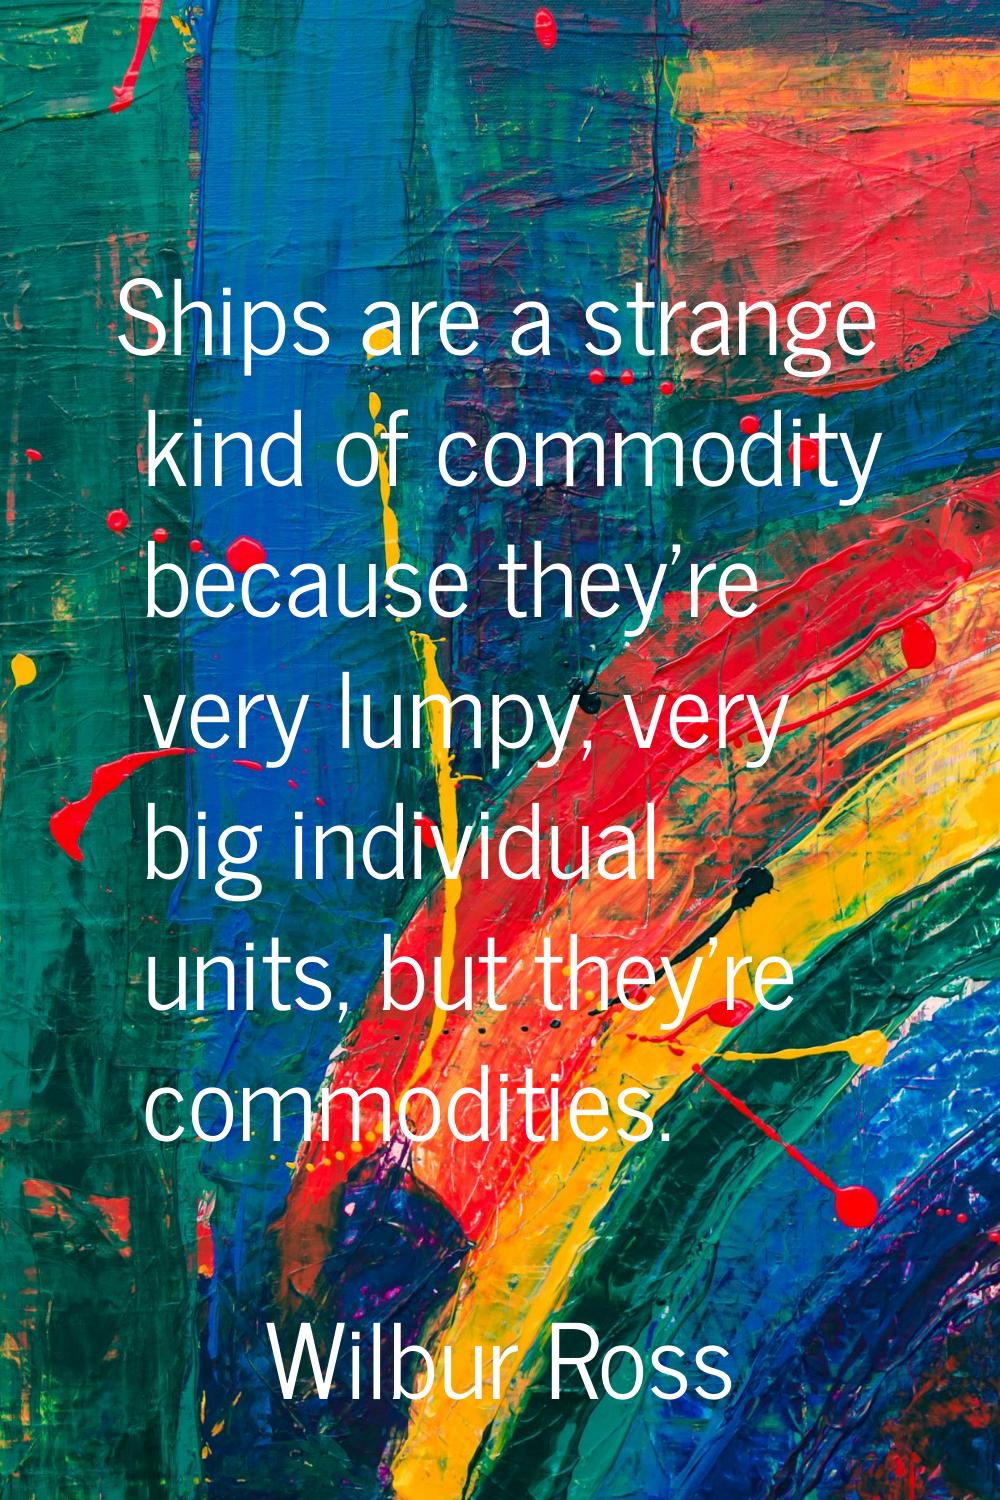 Ships are a strange kind of commodity because they're very lumpy, very big individual units, but th